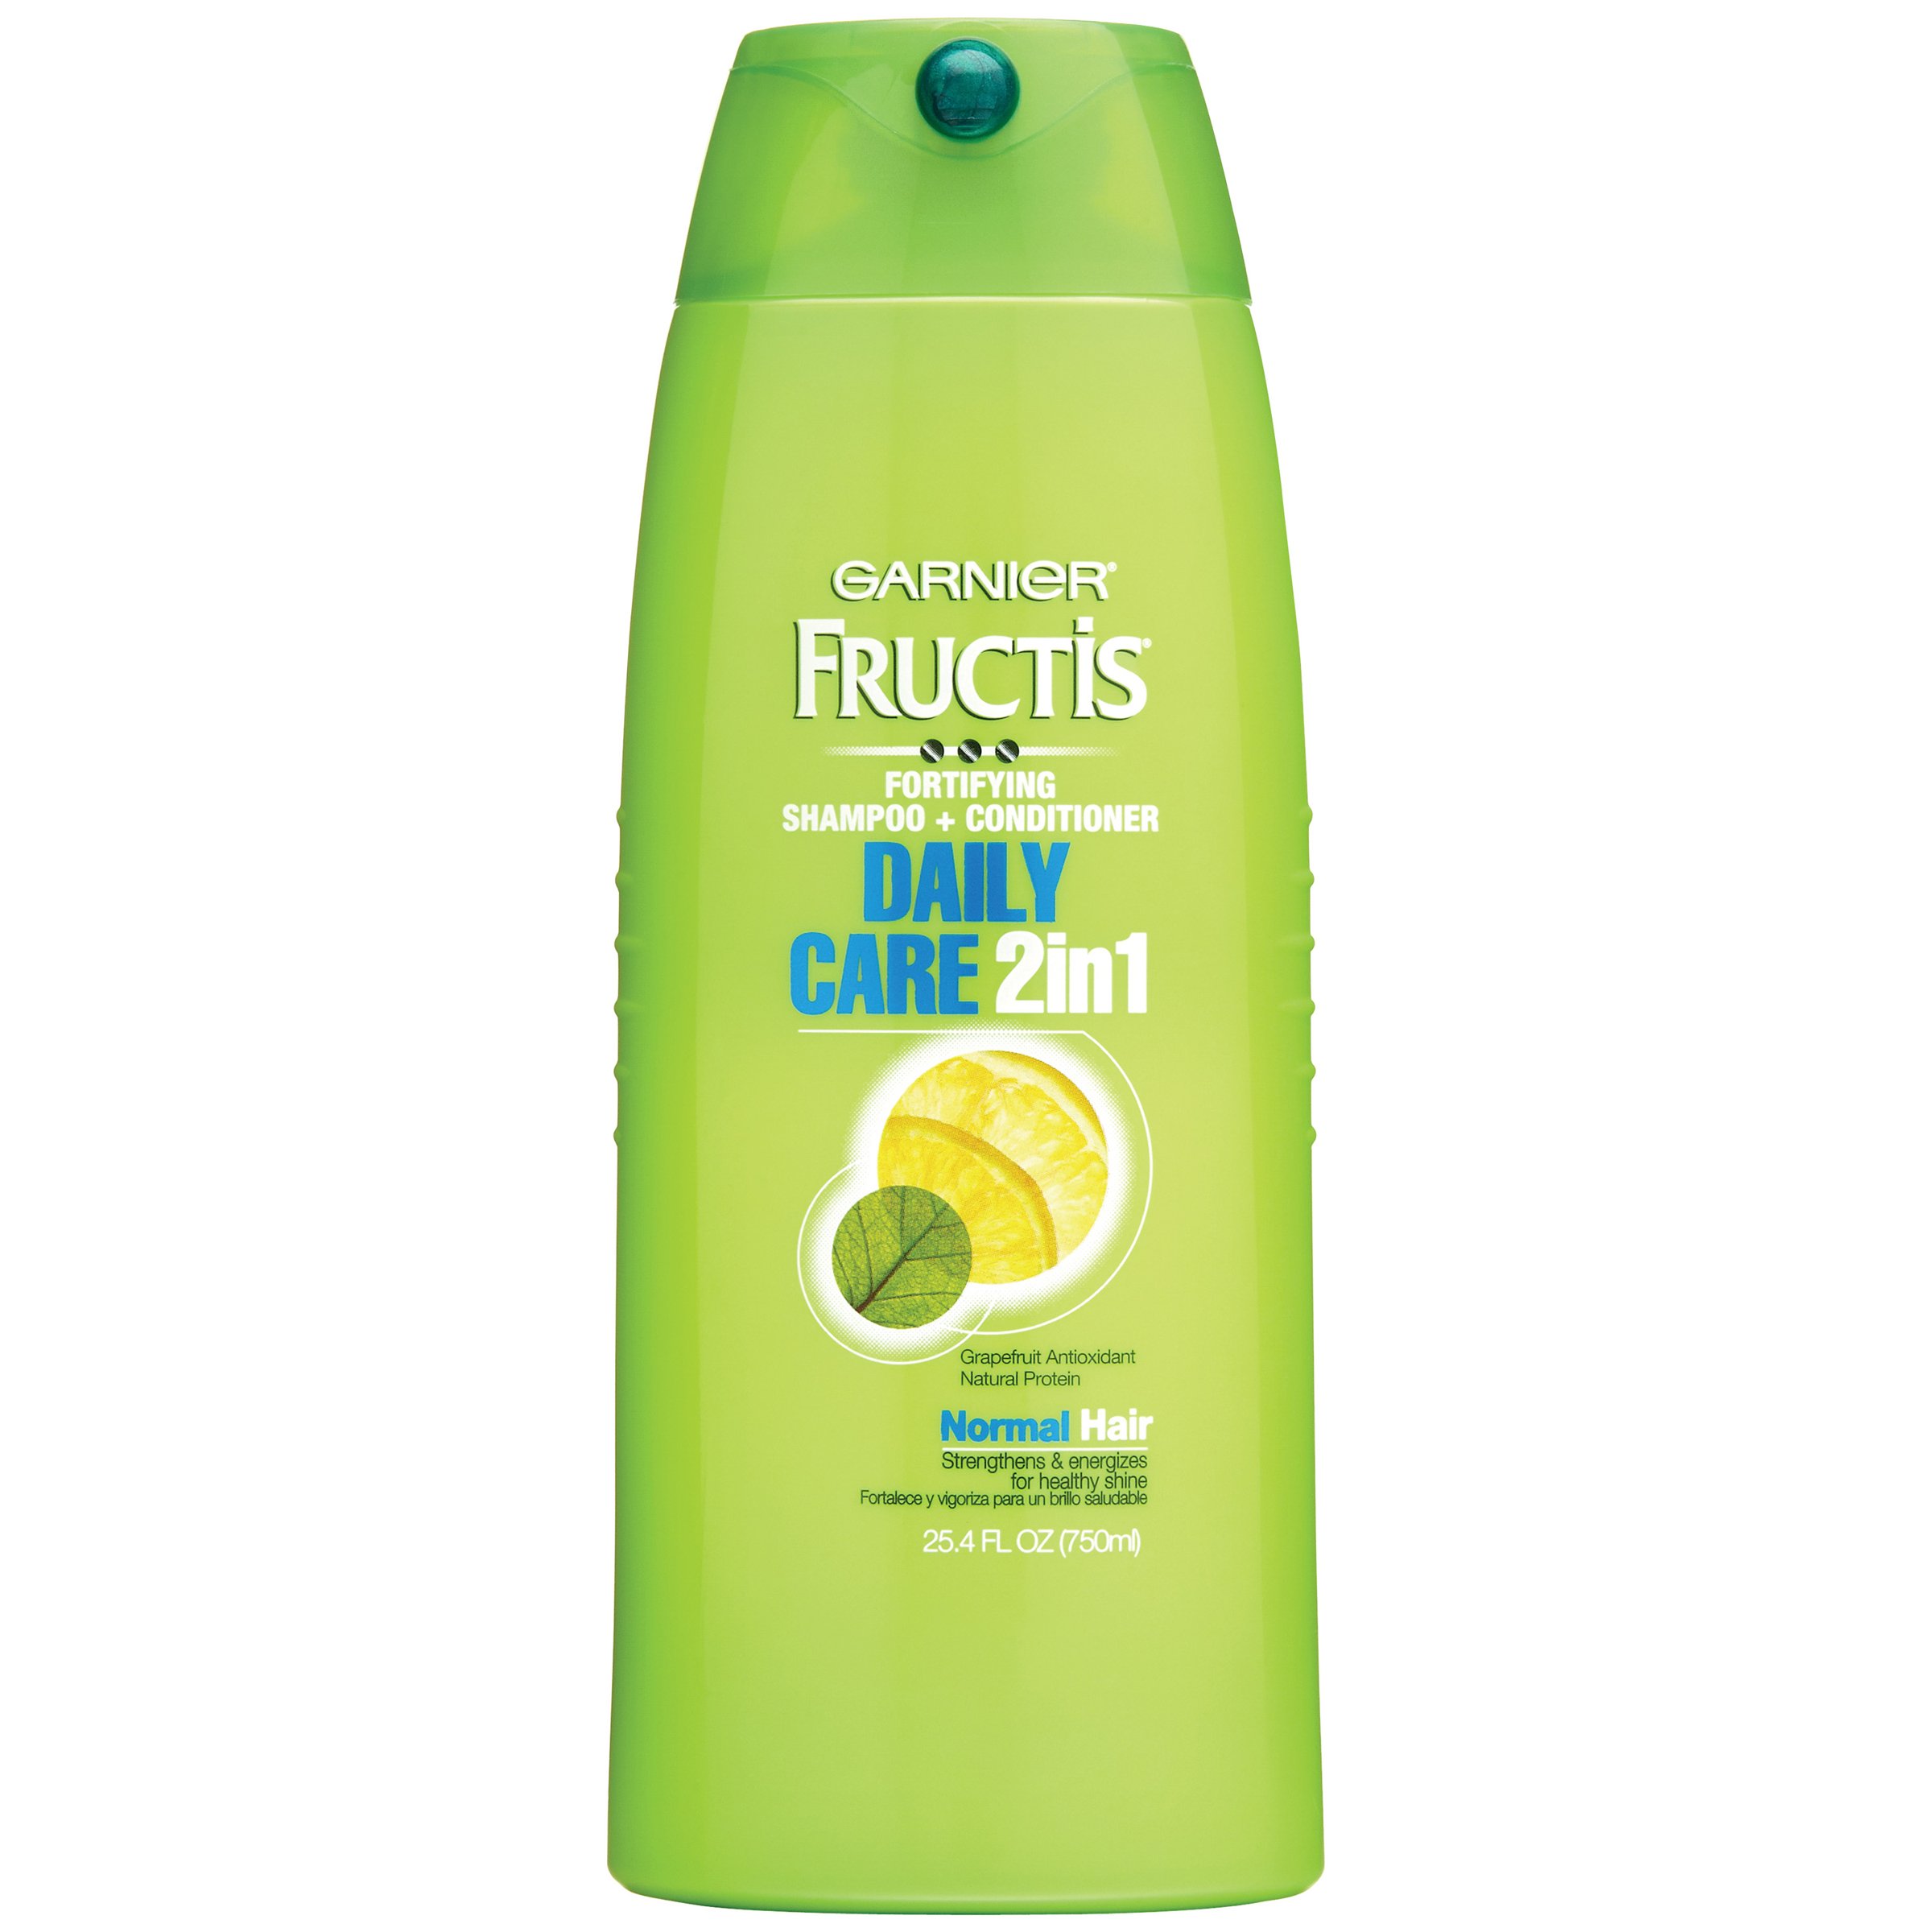 Garnier Daily Care 2-in-1 Fortifying Shampoo Conditioner for Normal Hair - Shop Hair Care at